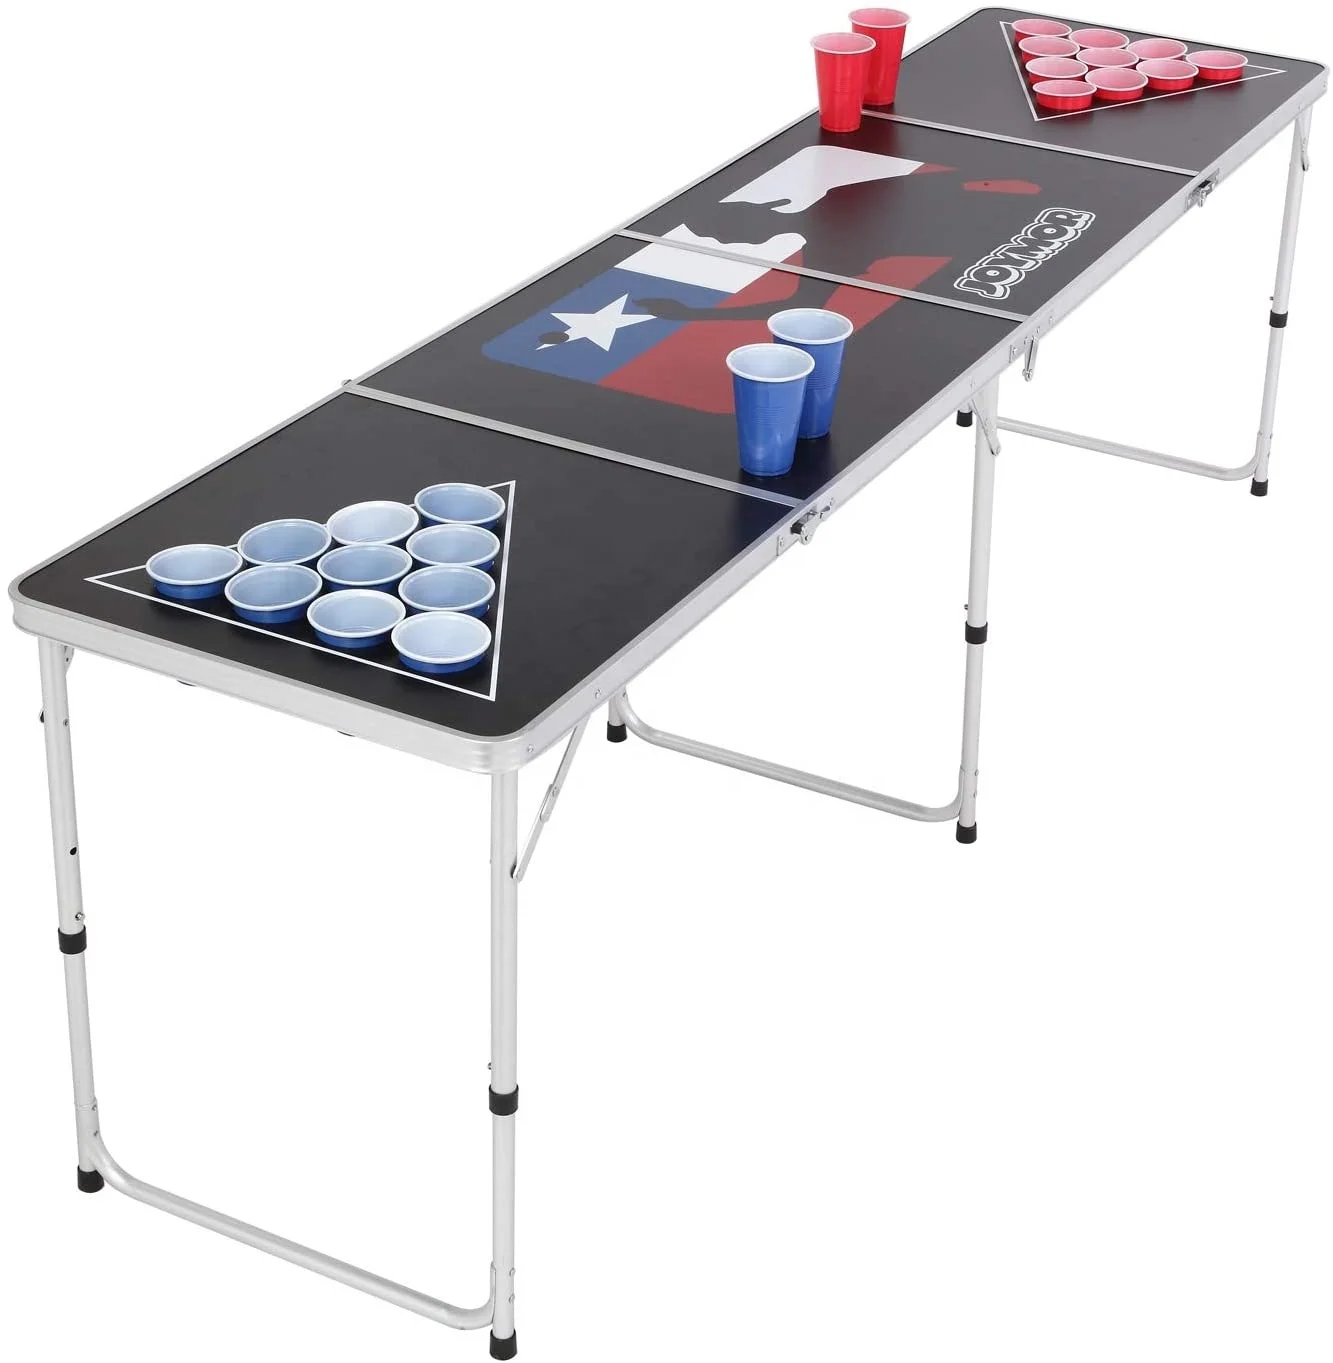 Foldable beerpong table 8 feet portable folding led beer pong table with cup holes